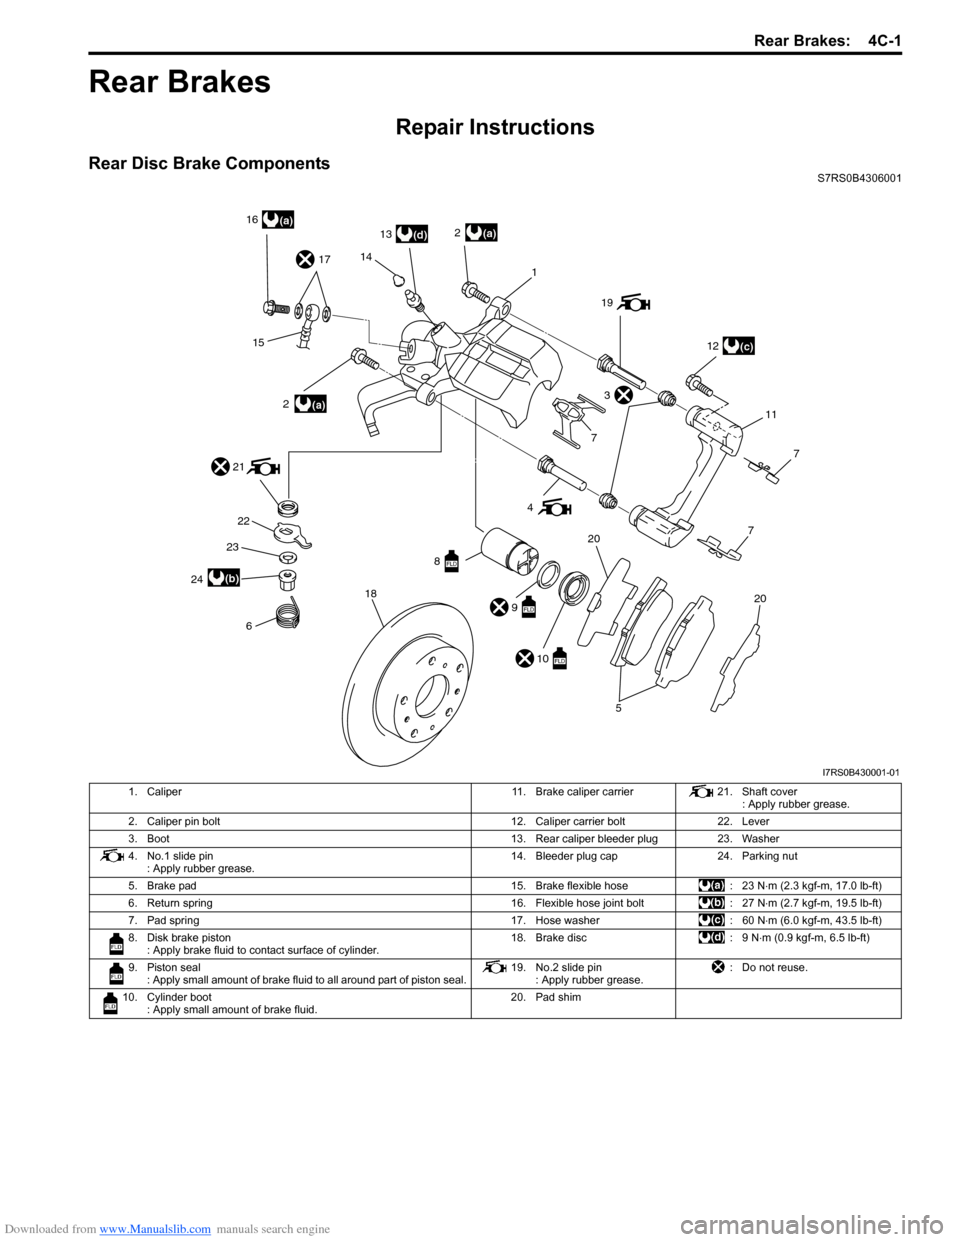 SUZUKI SWIFT 2006 2.G Service Workshop Manual Downloaded from www.Manualslib.com manuals search engine Rear Brakes:  4C-1
Brakes
Rear Brakes
Repair Instructions
Rear Disc Brake ComponentsS7RS0B4306001
(d)
(c)
(a)
(a)
(a)16171413
2
1
15 2 19
12
11